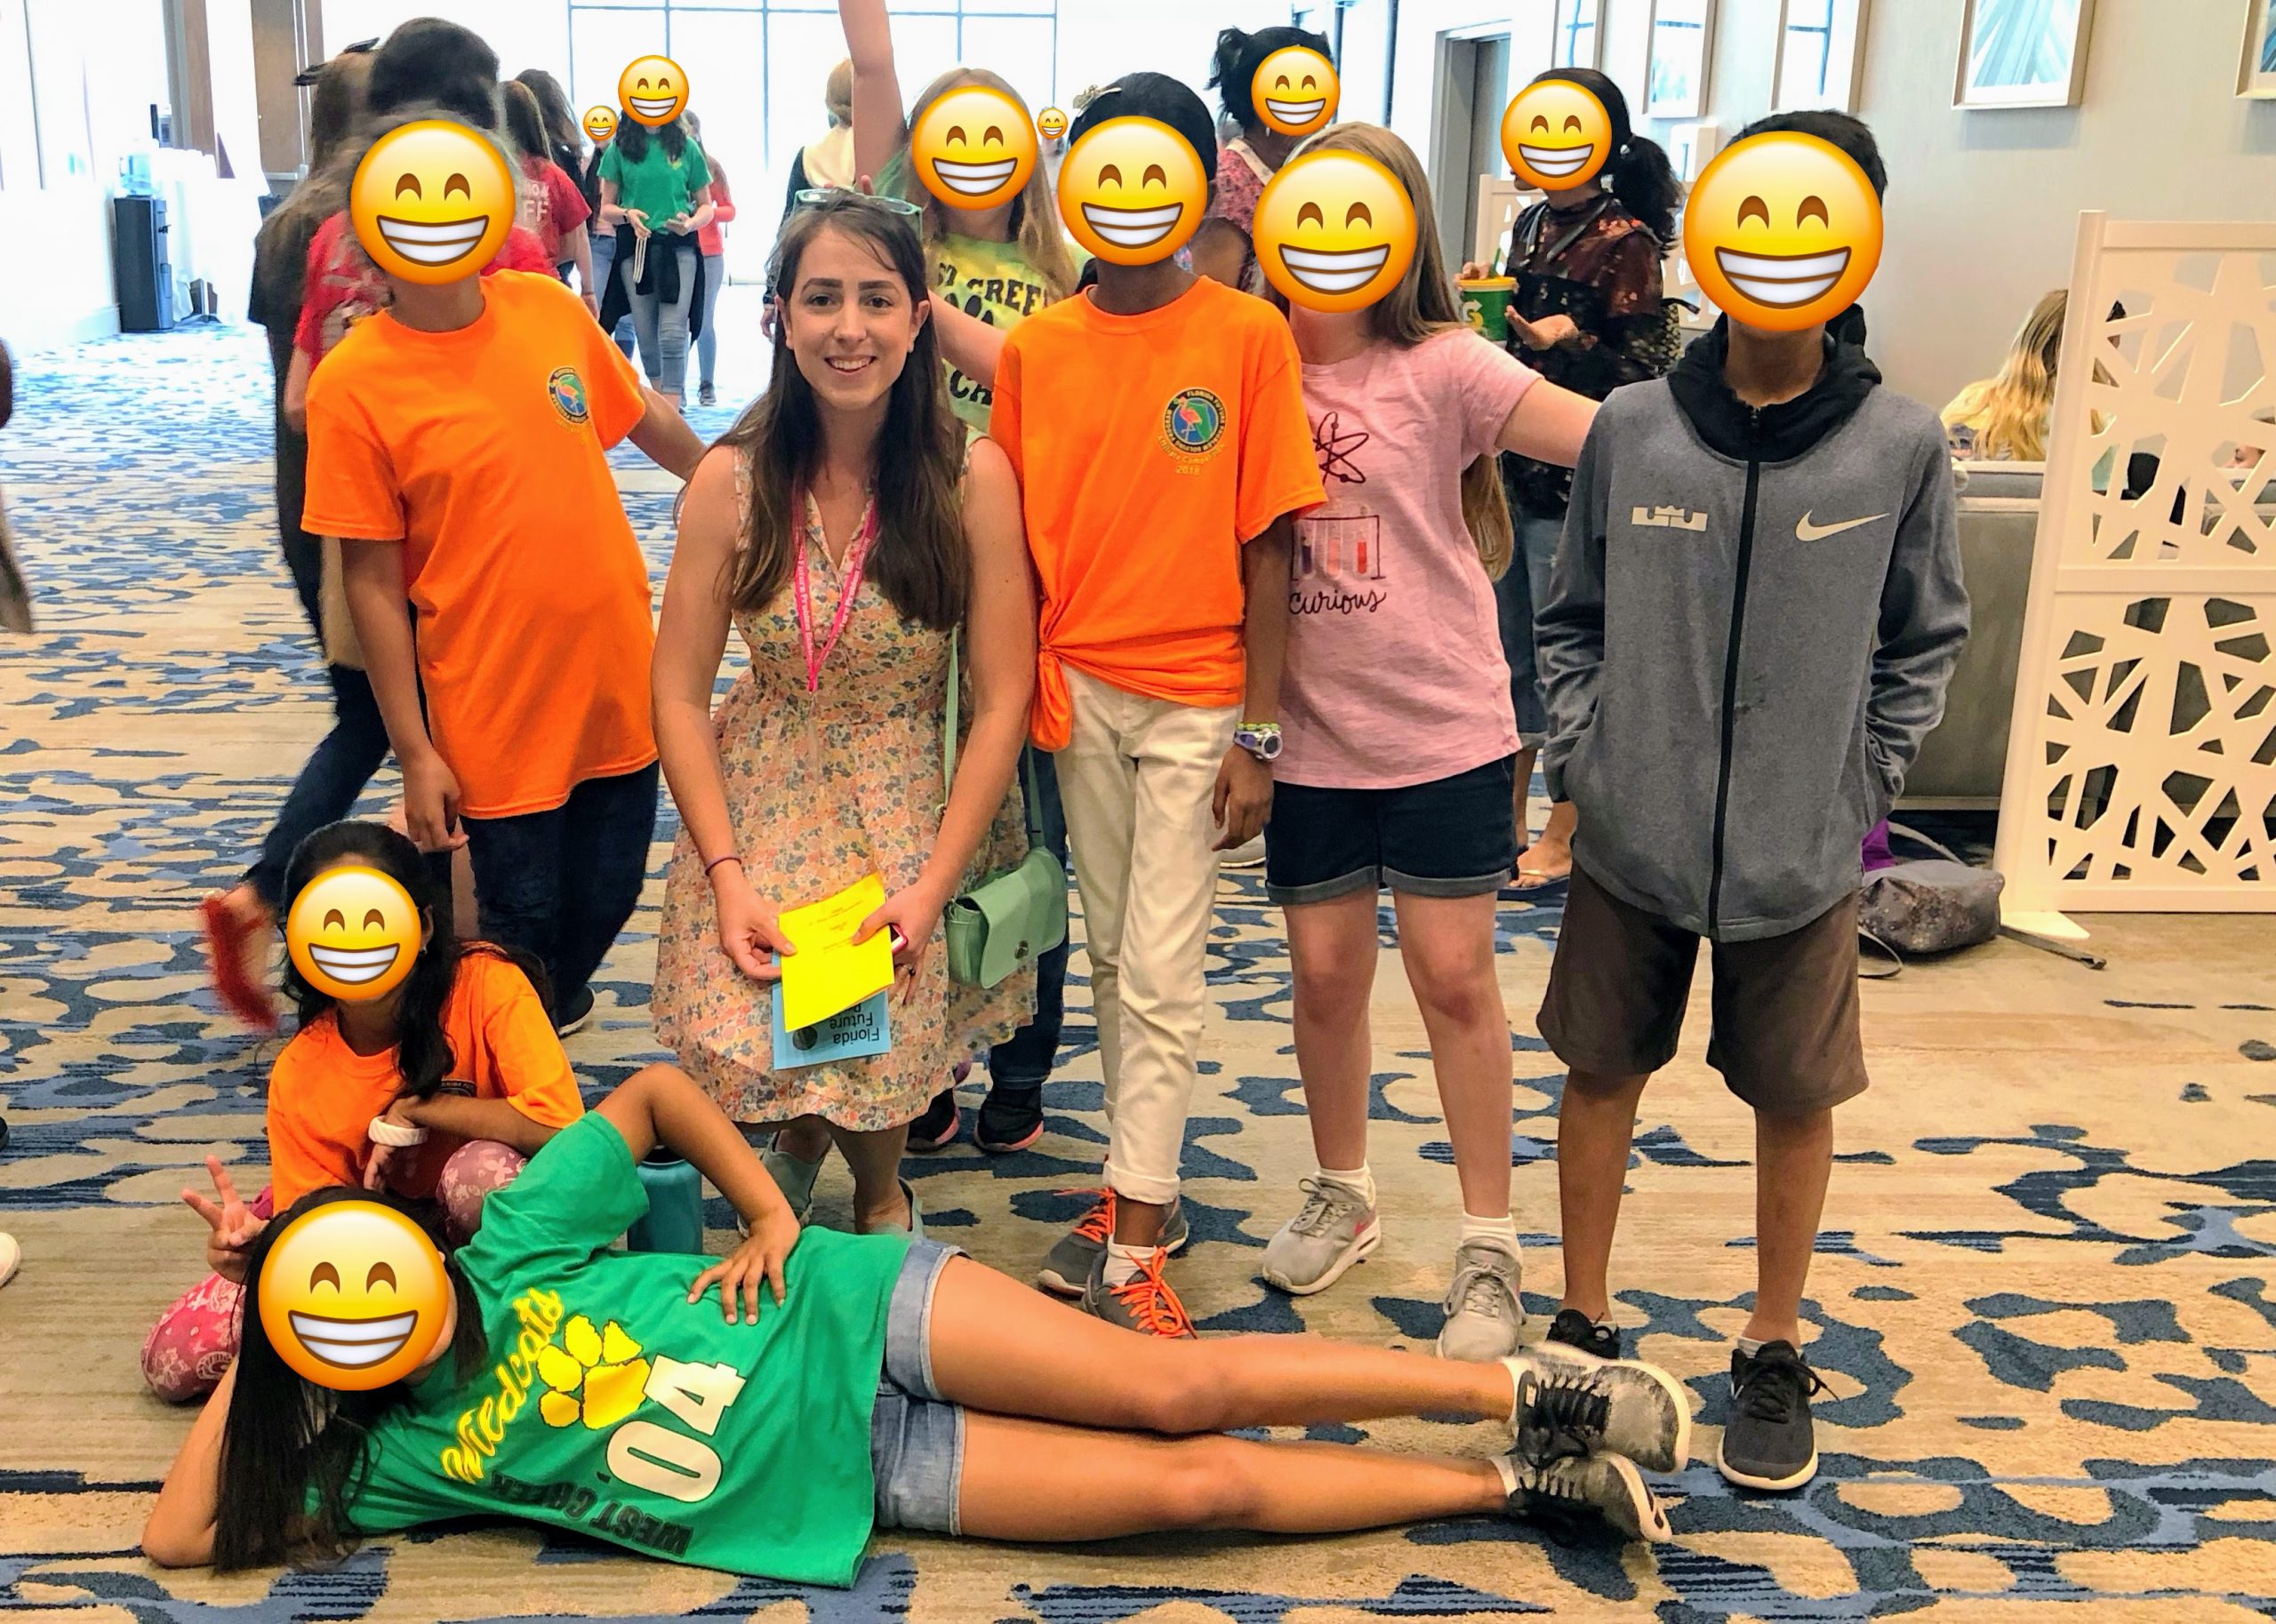 Teacher posing with team of students